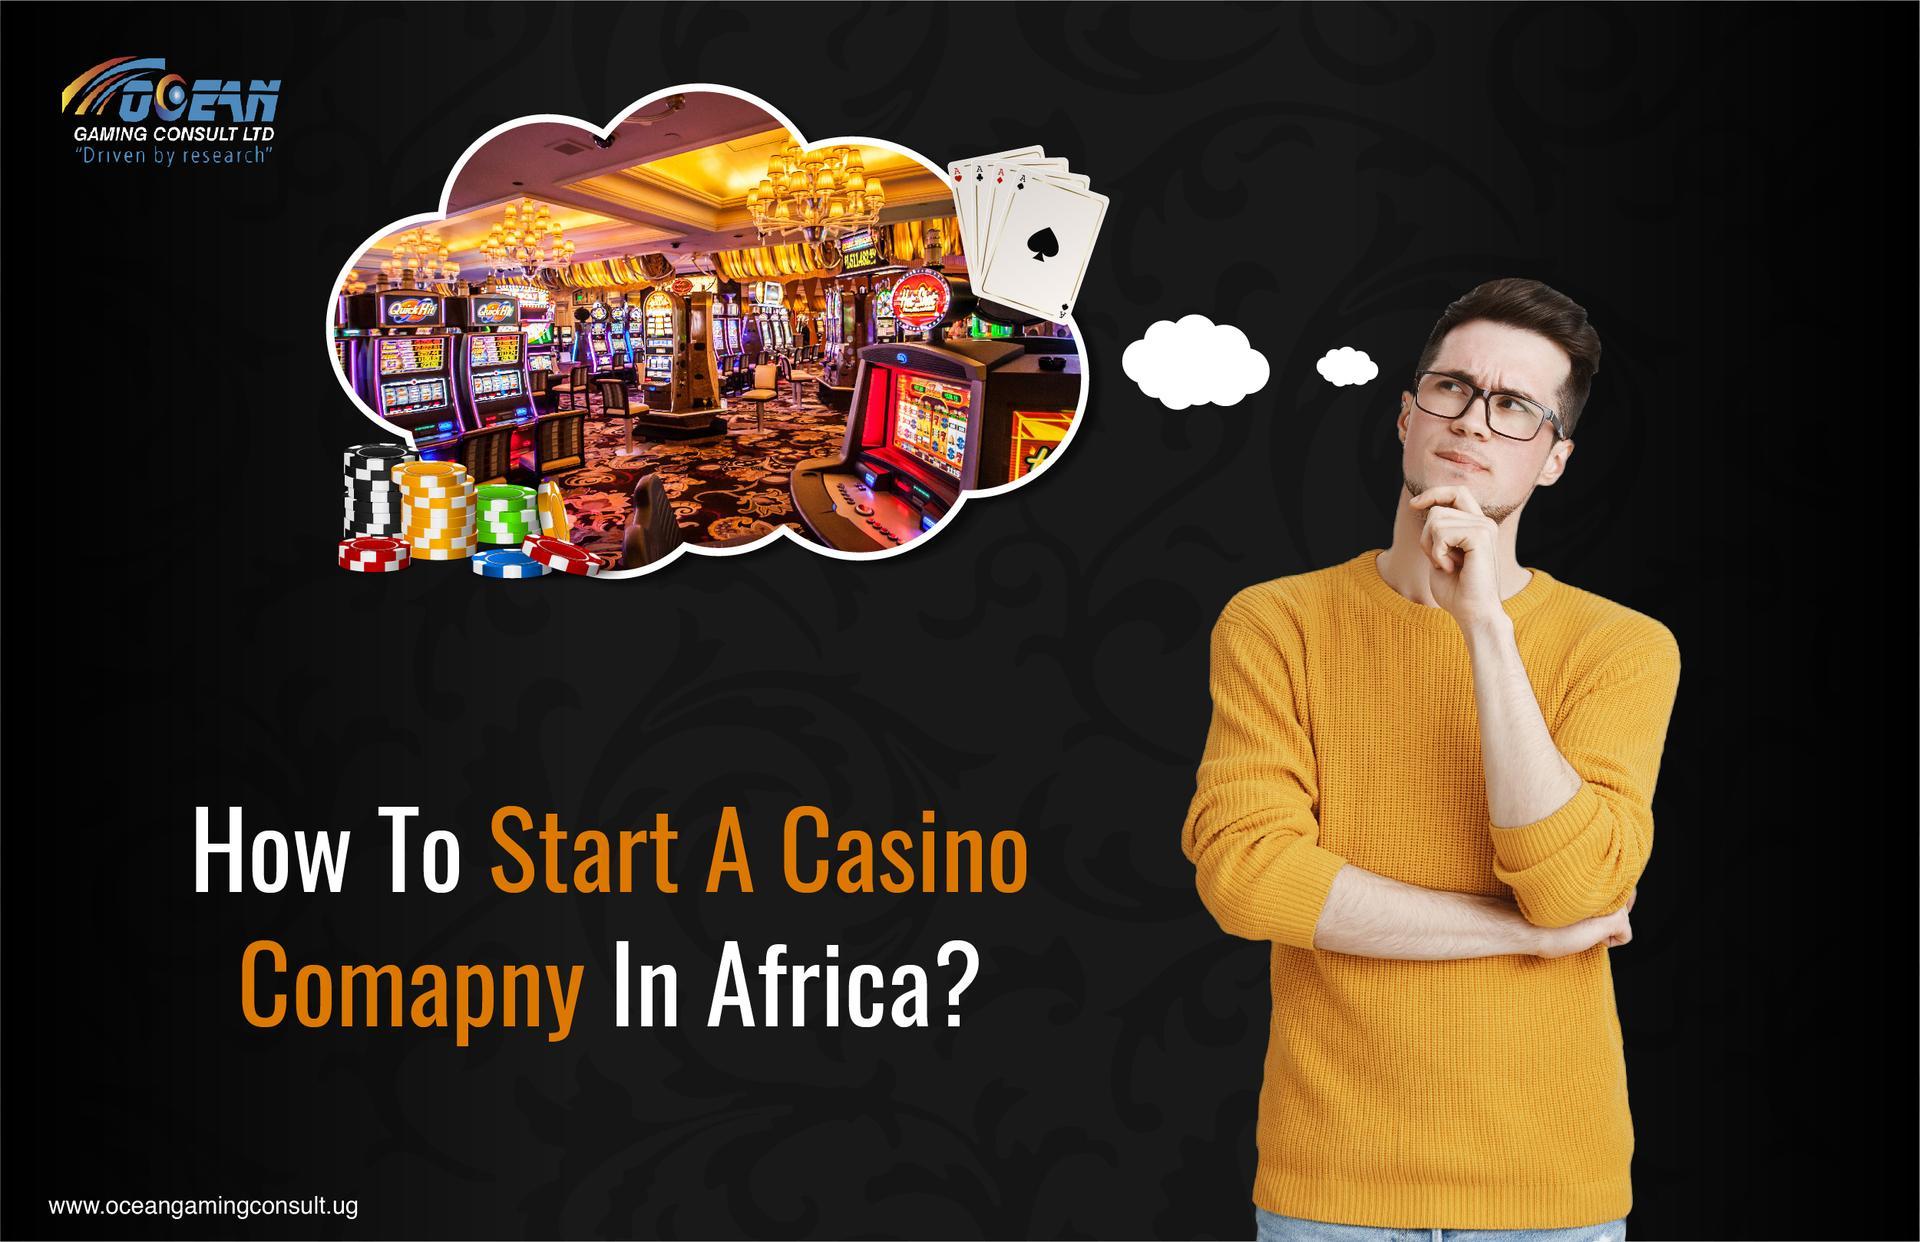 How To Start A Casino Company In Africa?